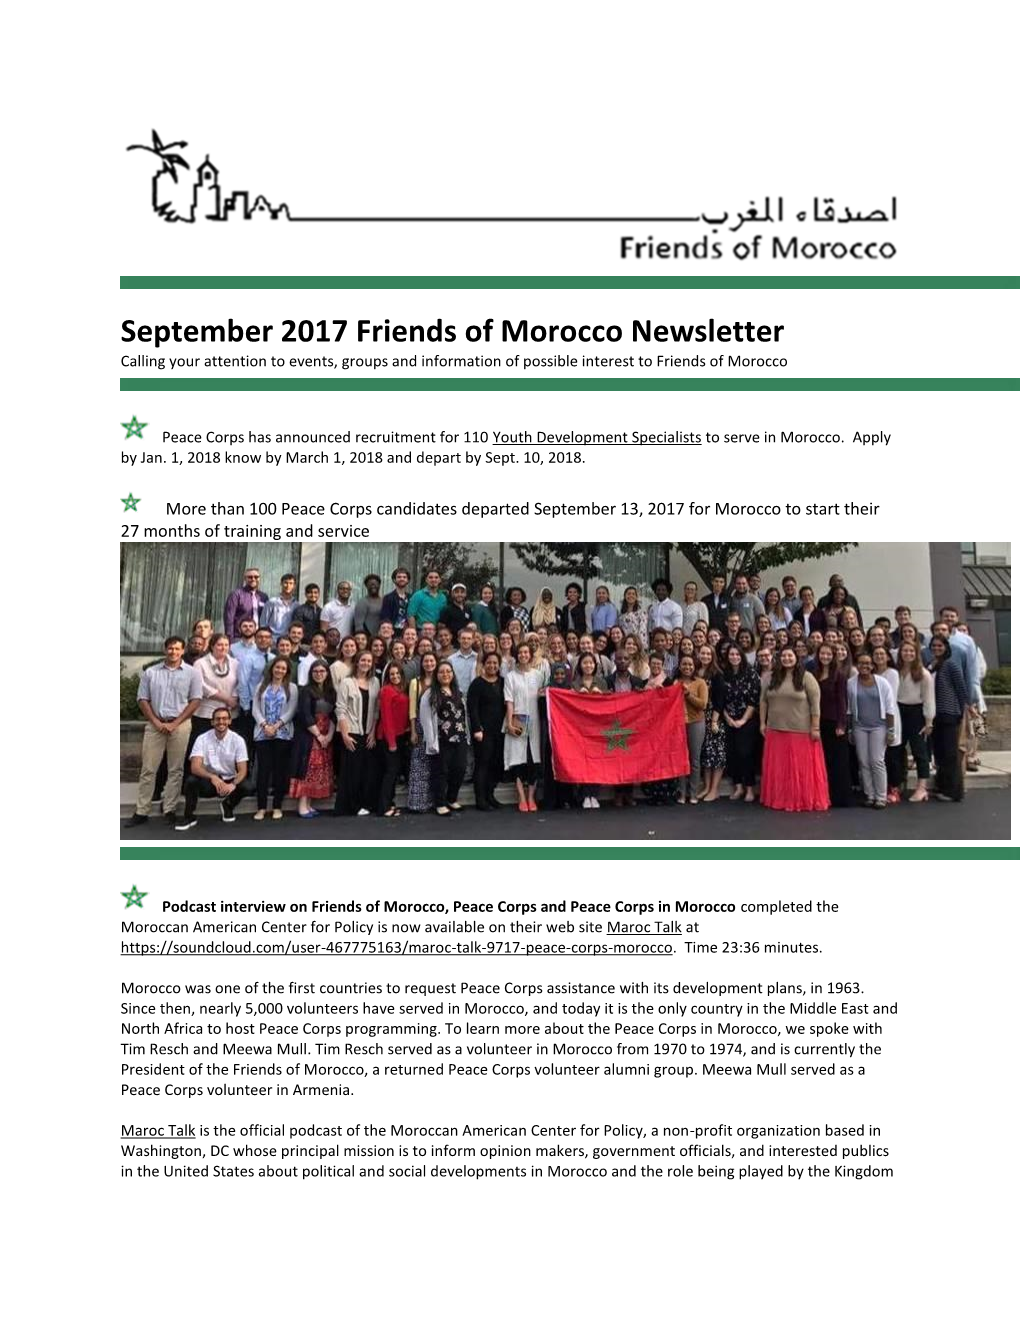 September 2017 Friends of Morocco Newsletter Calling Your Attention to Events, Groups and Information of Possible Interest to Friends of Morocco